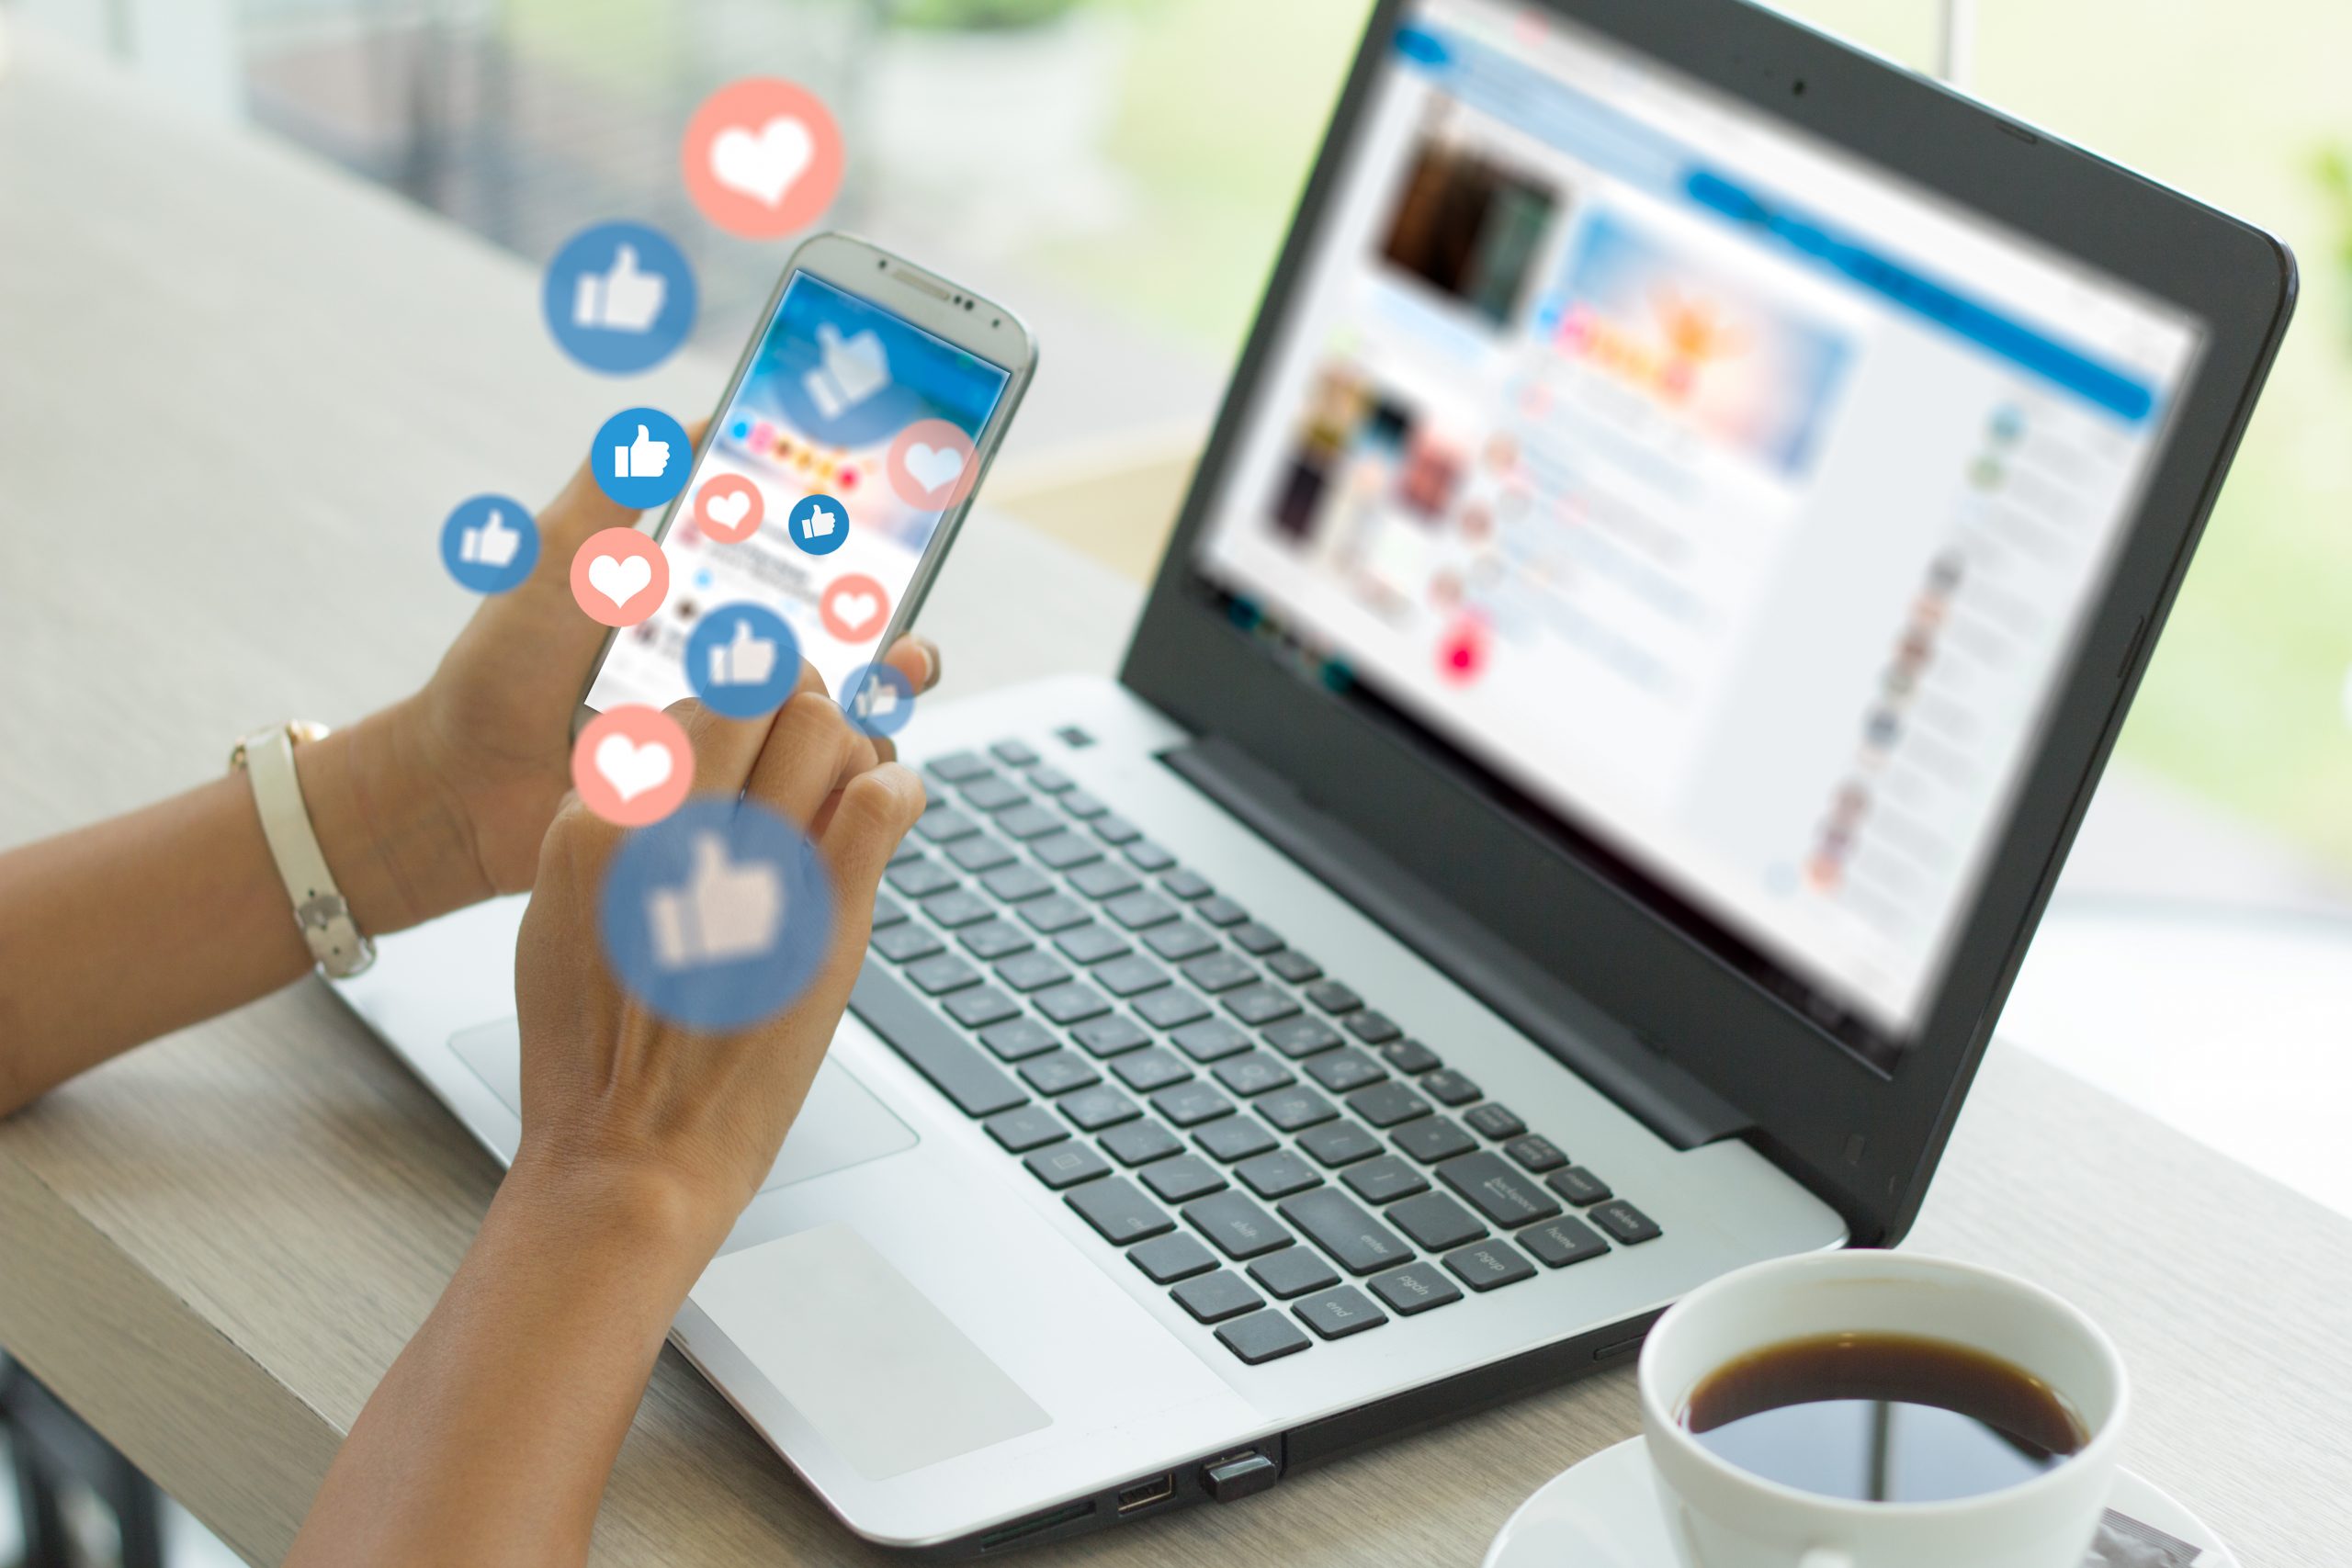 Best Social Media Marketing Tips from the Industry Experts